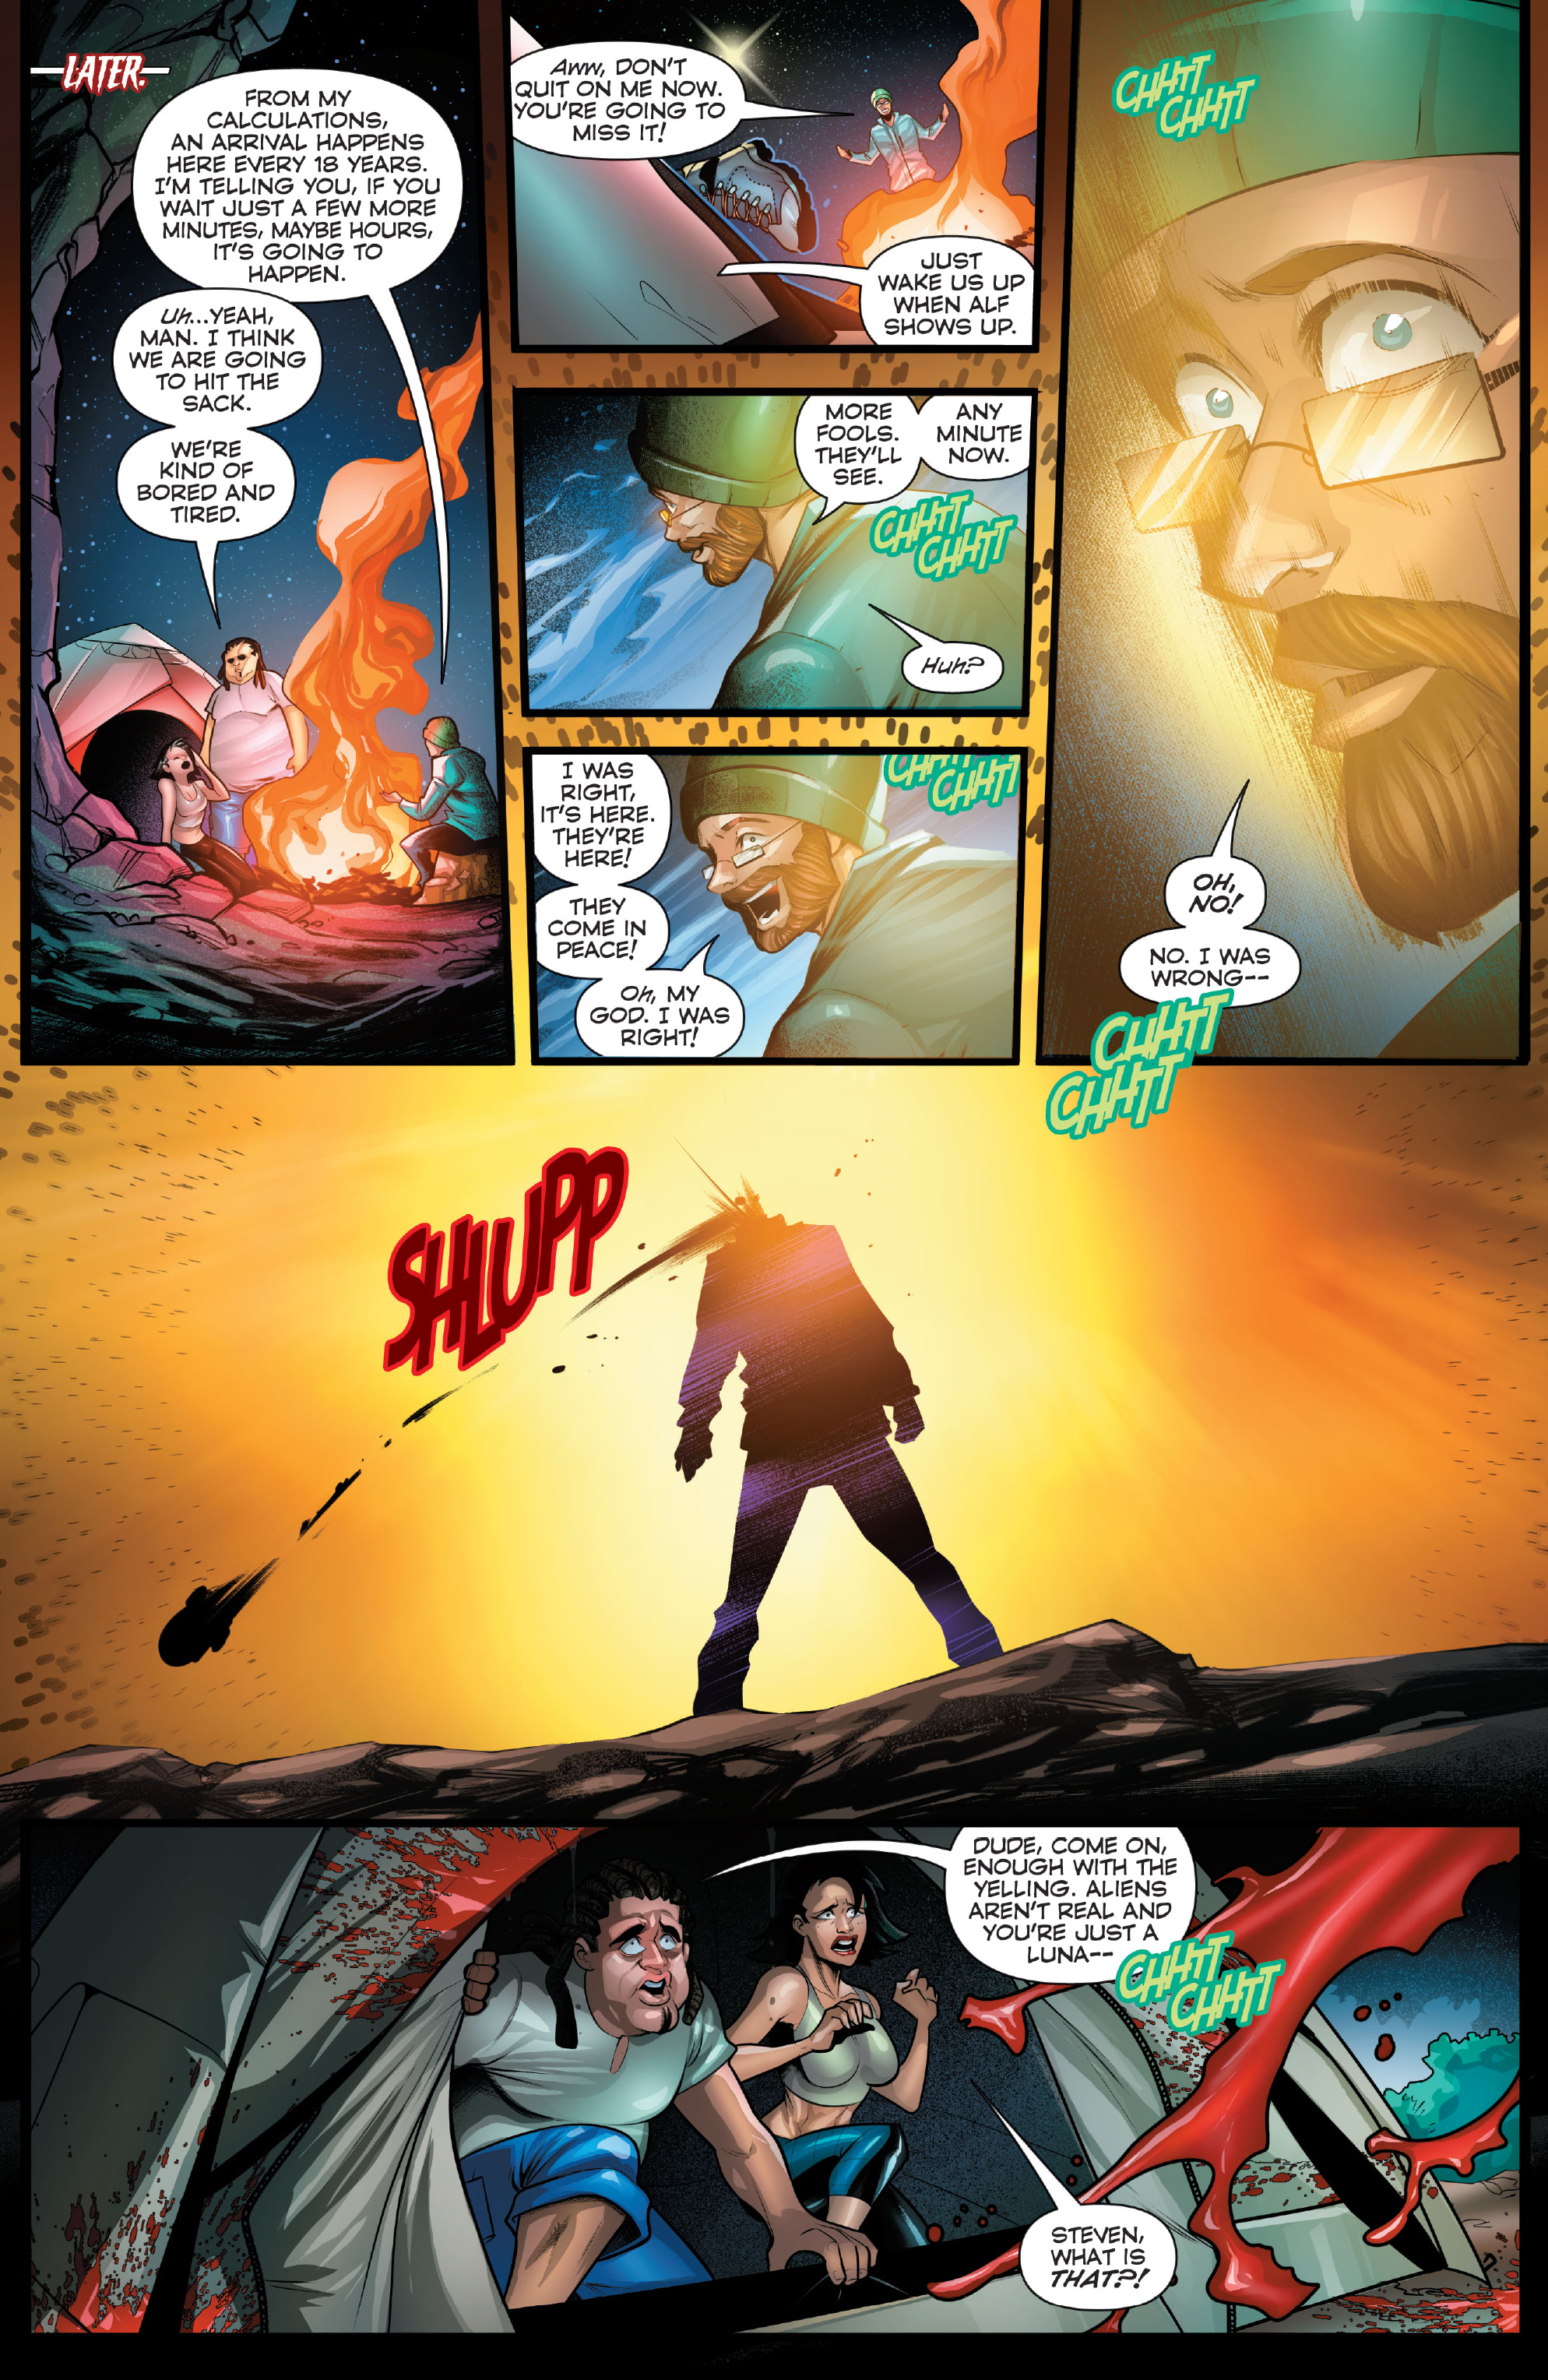 Grimm Fairy Tales - 2022 May the 4th Cosplay Special (2022): Chapter 1 - Page 4